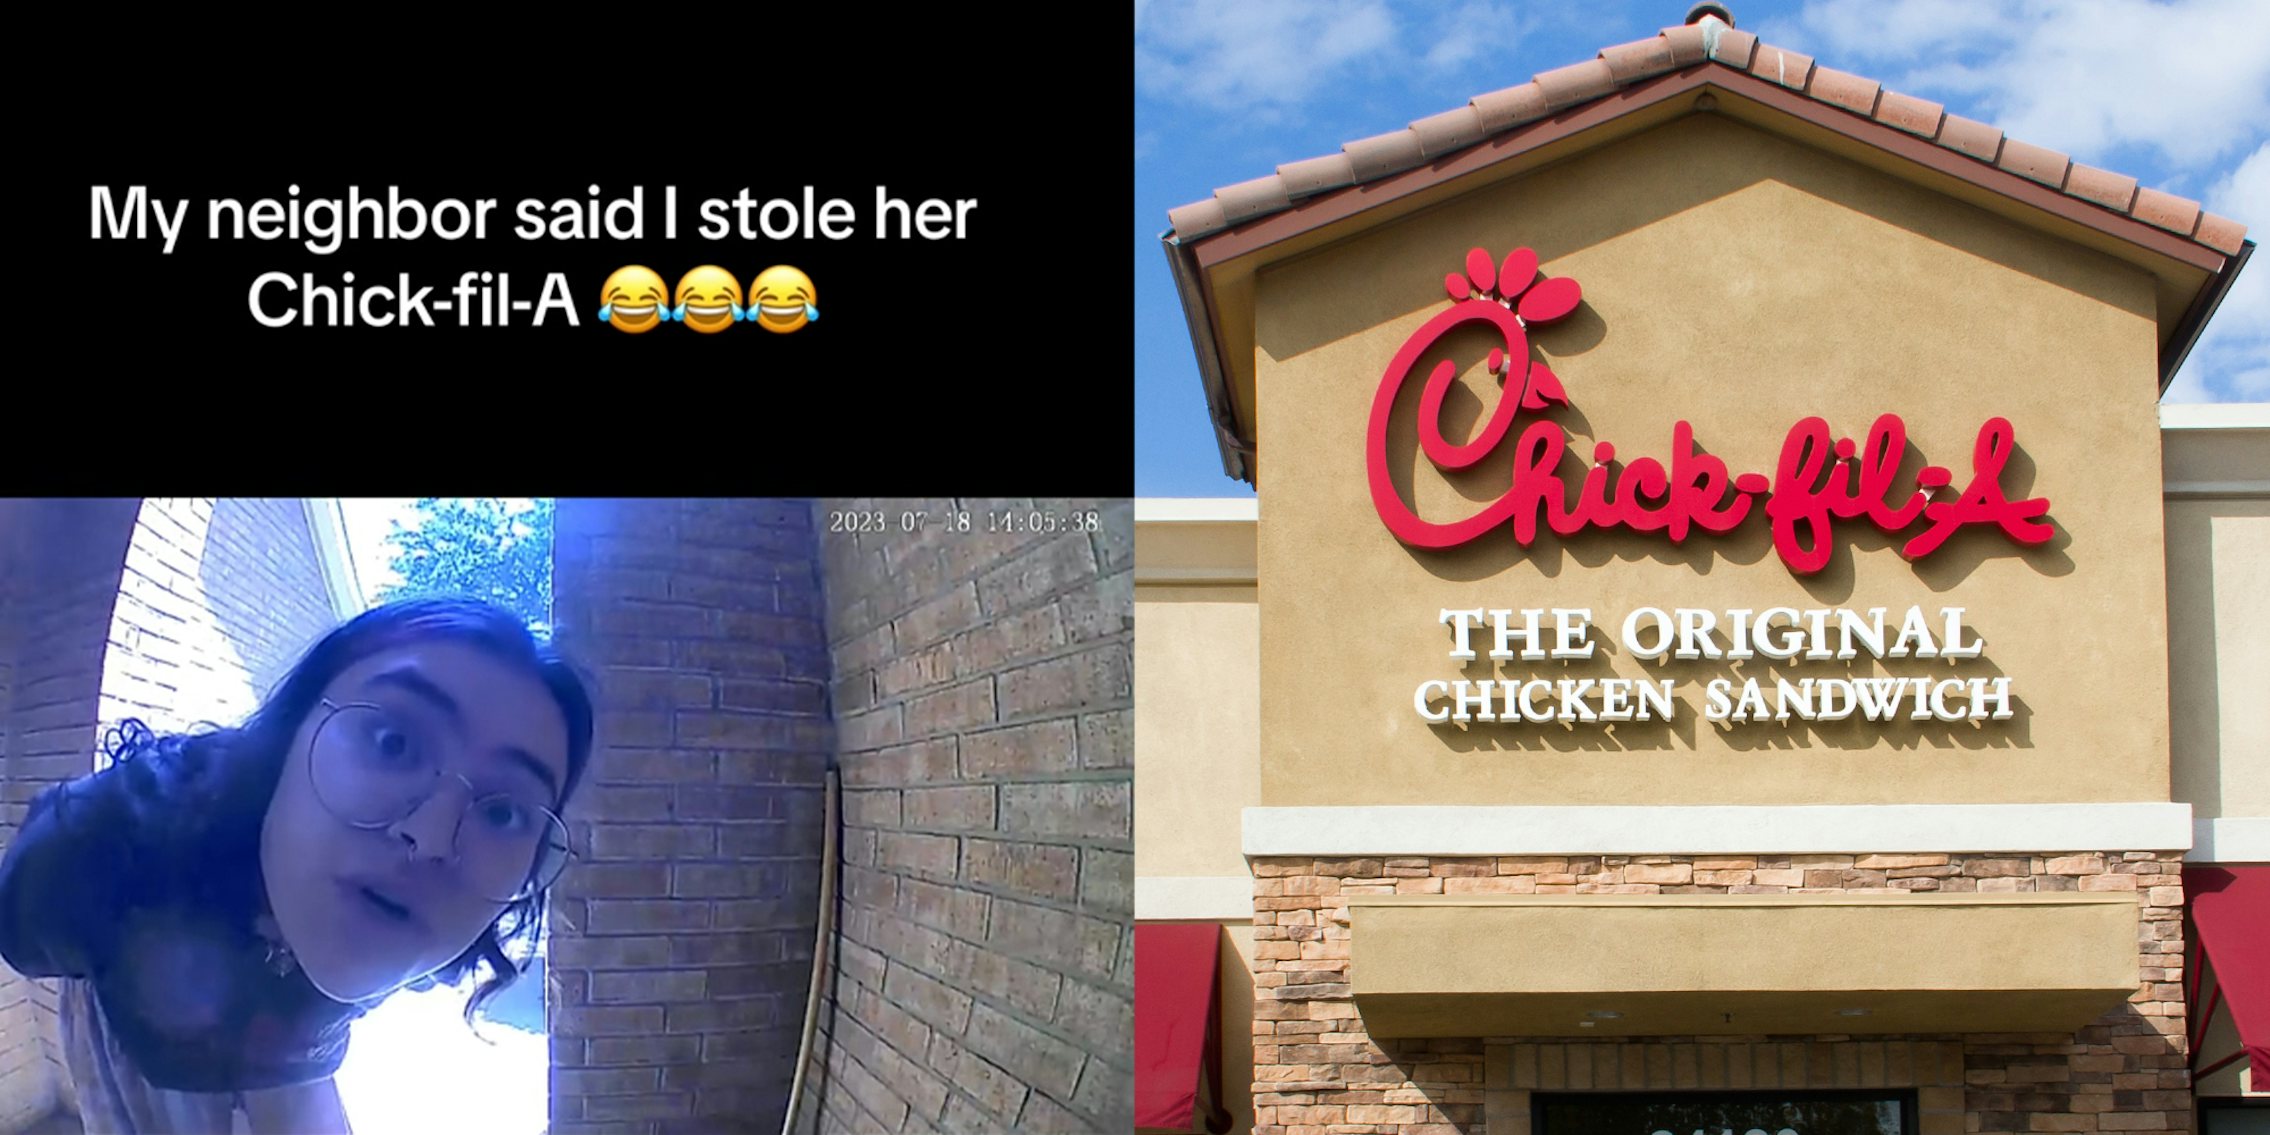 Delivery customer slams on neighbor's door after accusing them of stealing her Chick-fil-A